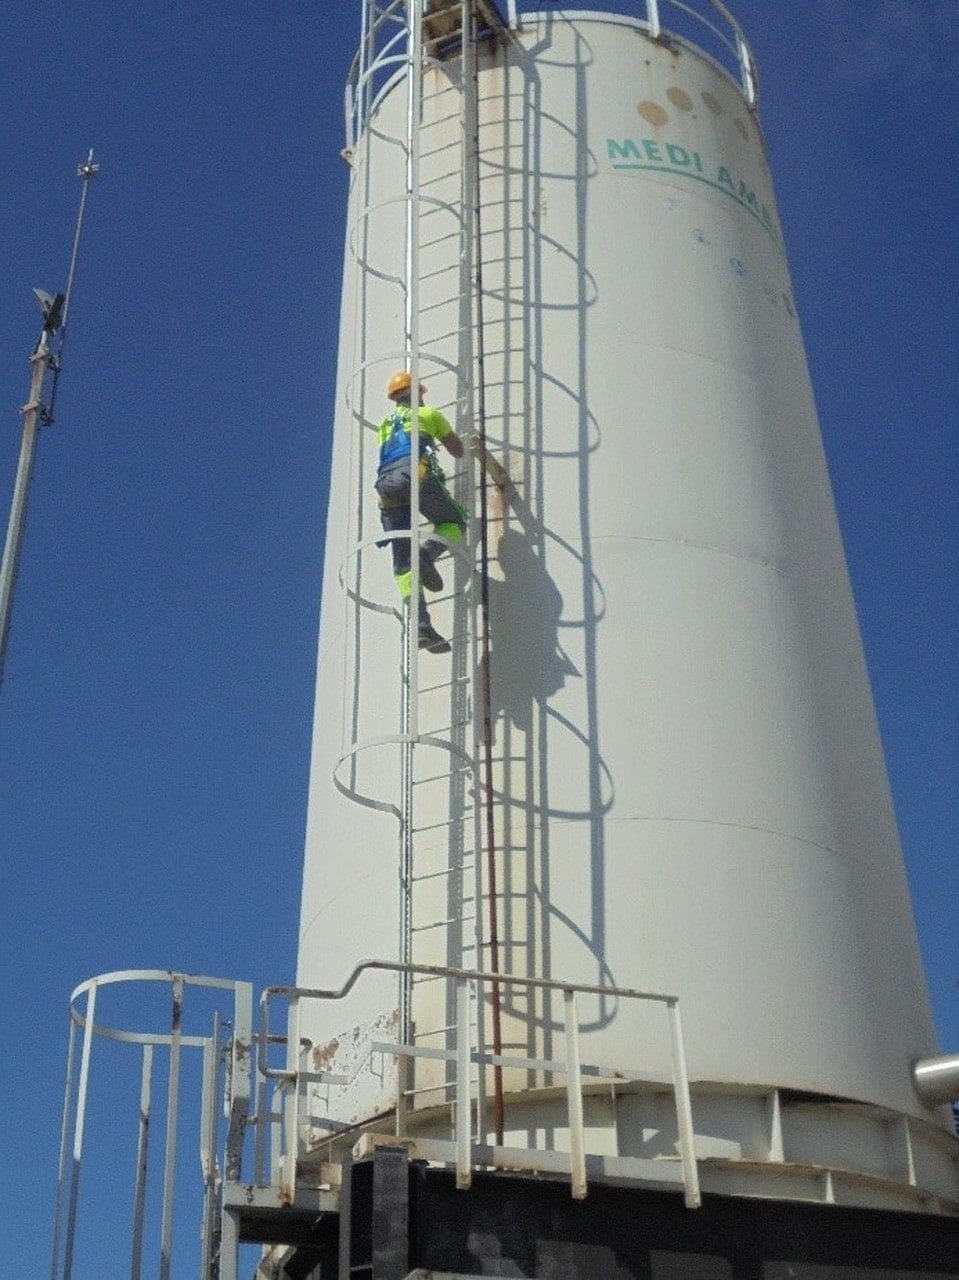 Working safety at height